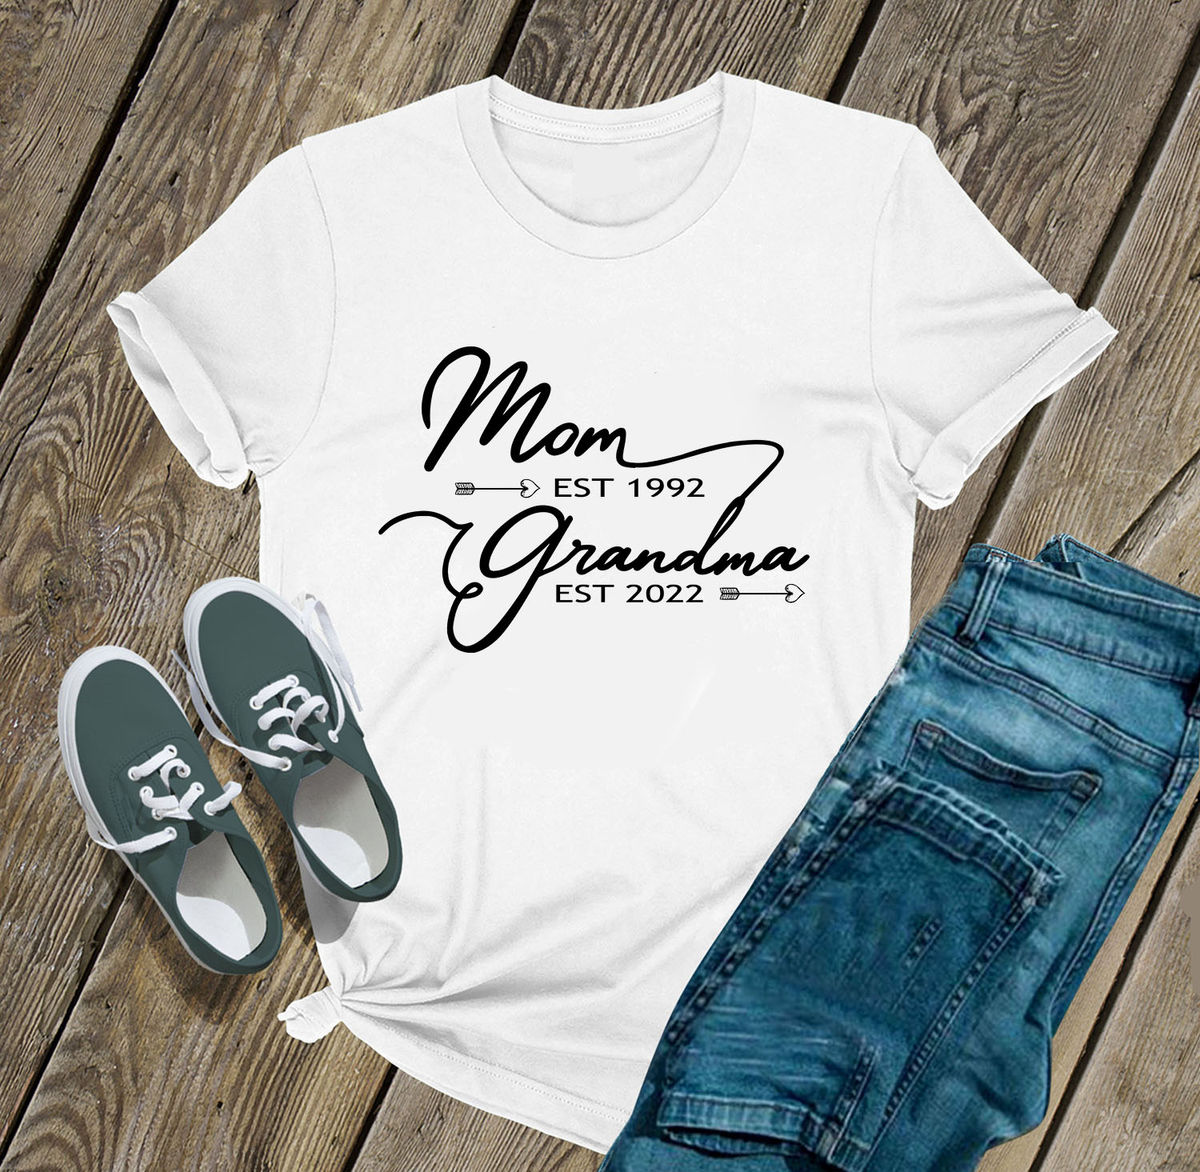 Mother's Day 2023 - Personalized Mother's Day Shirt, Mom Grandma Shirt, Nana Shirt Gift, Mother Grandma Birthday Gift